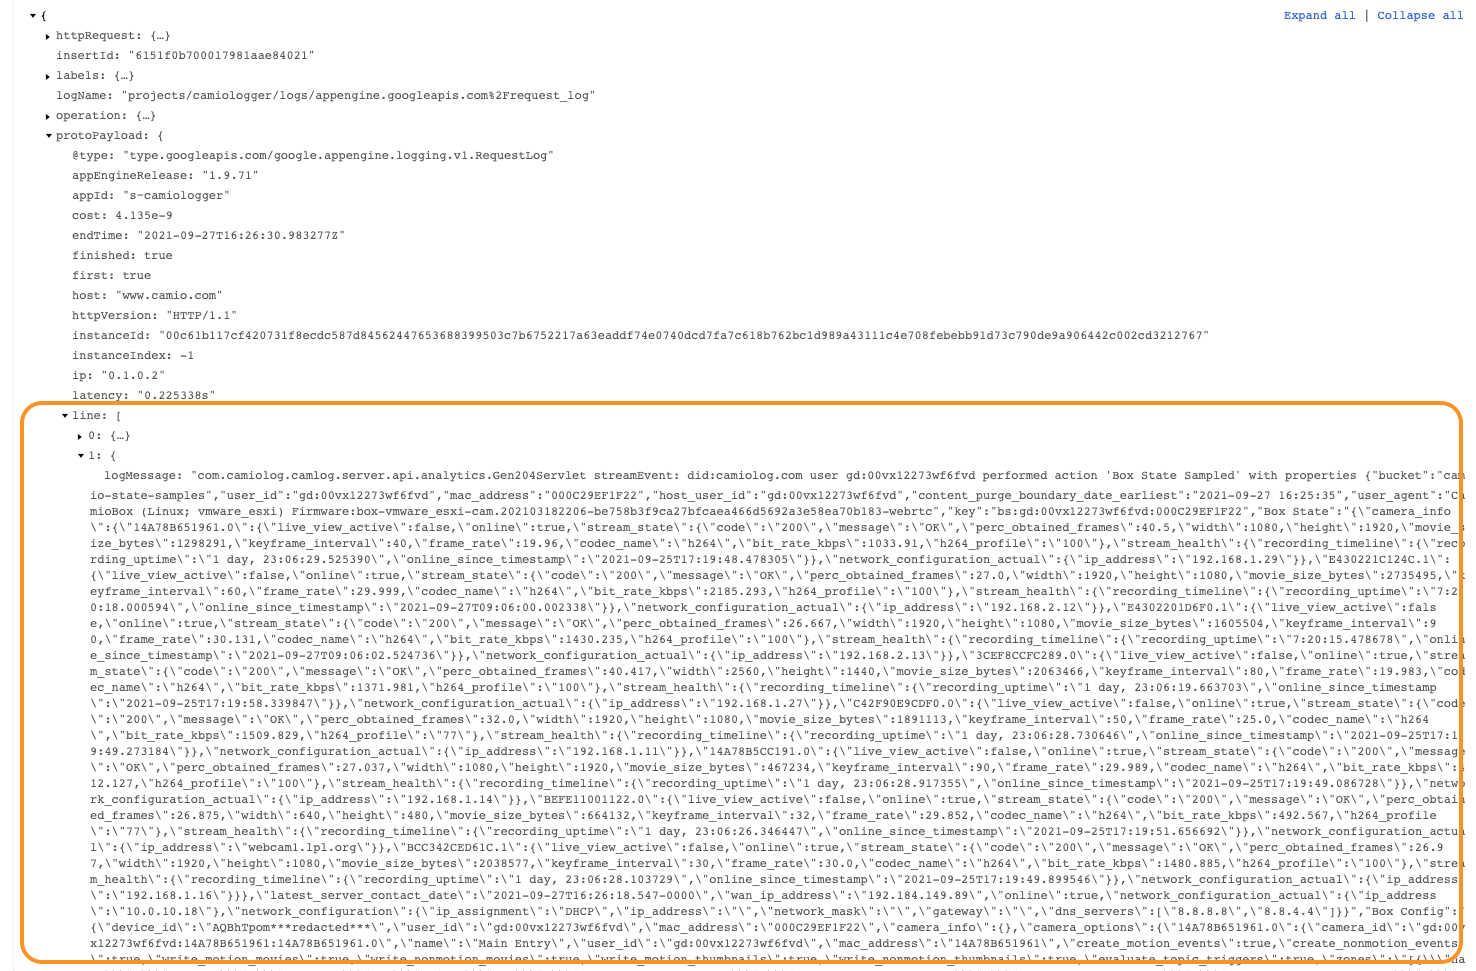 sample_log_payload_from_logs_router_Screen_Shot_2021-09-27_at_4.48.07_PM.png